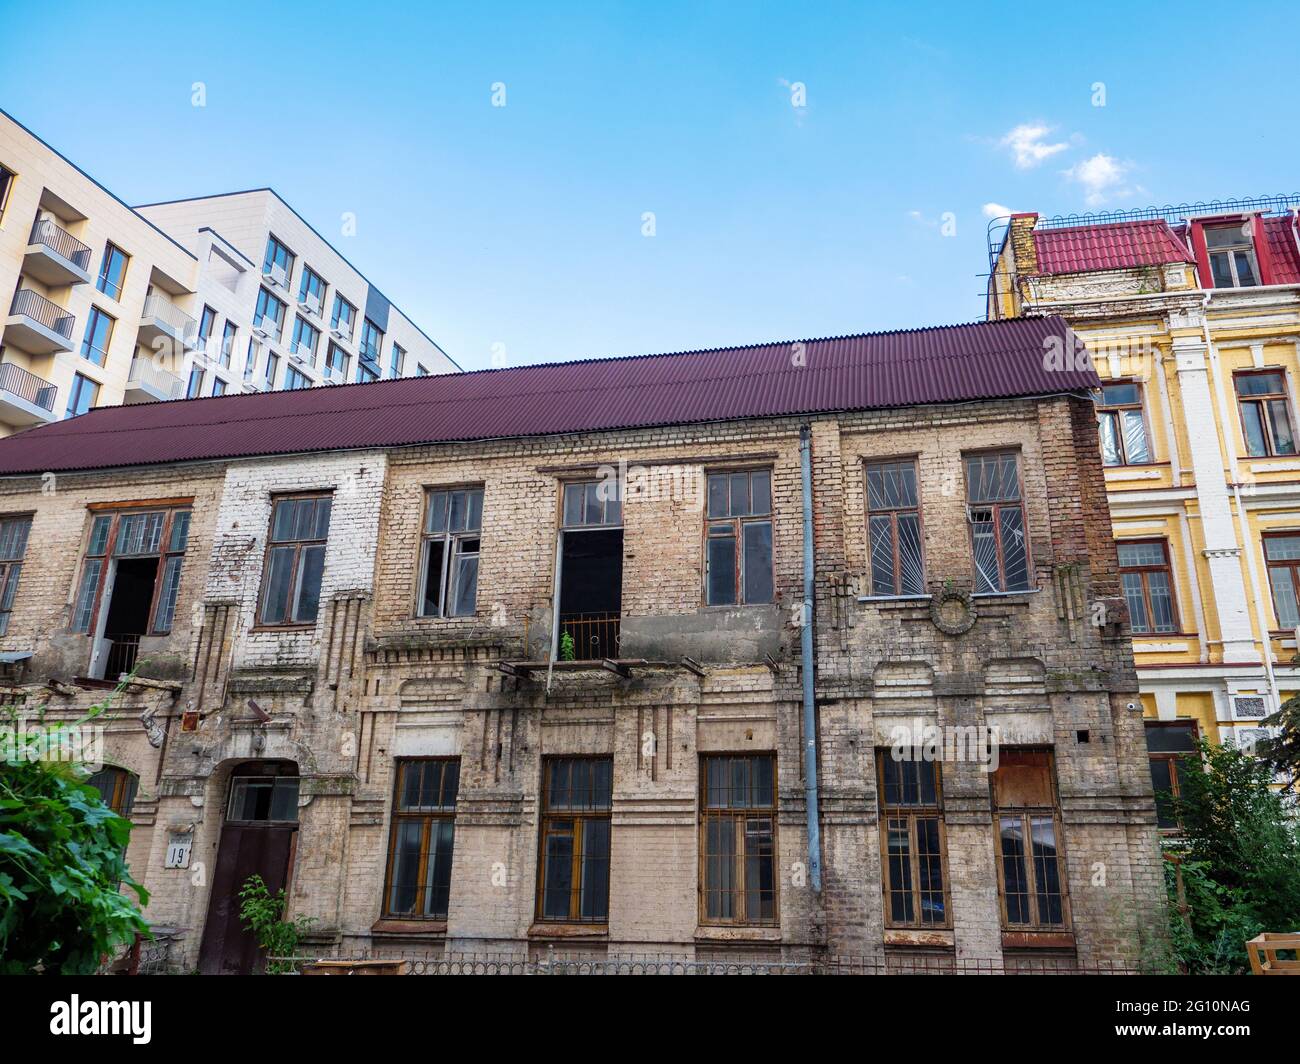 The exterior of an old half-ruined two-story forsaken brick building in a shade of a new freshly built high-rise in the center of Kyiv city, Ukraine. Stock Photo